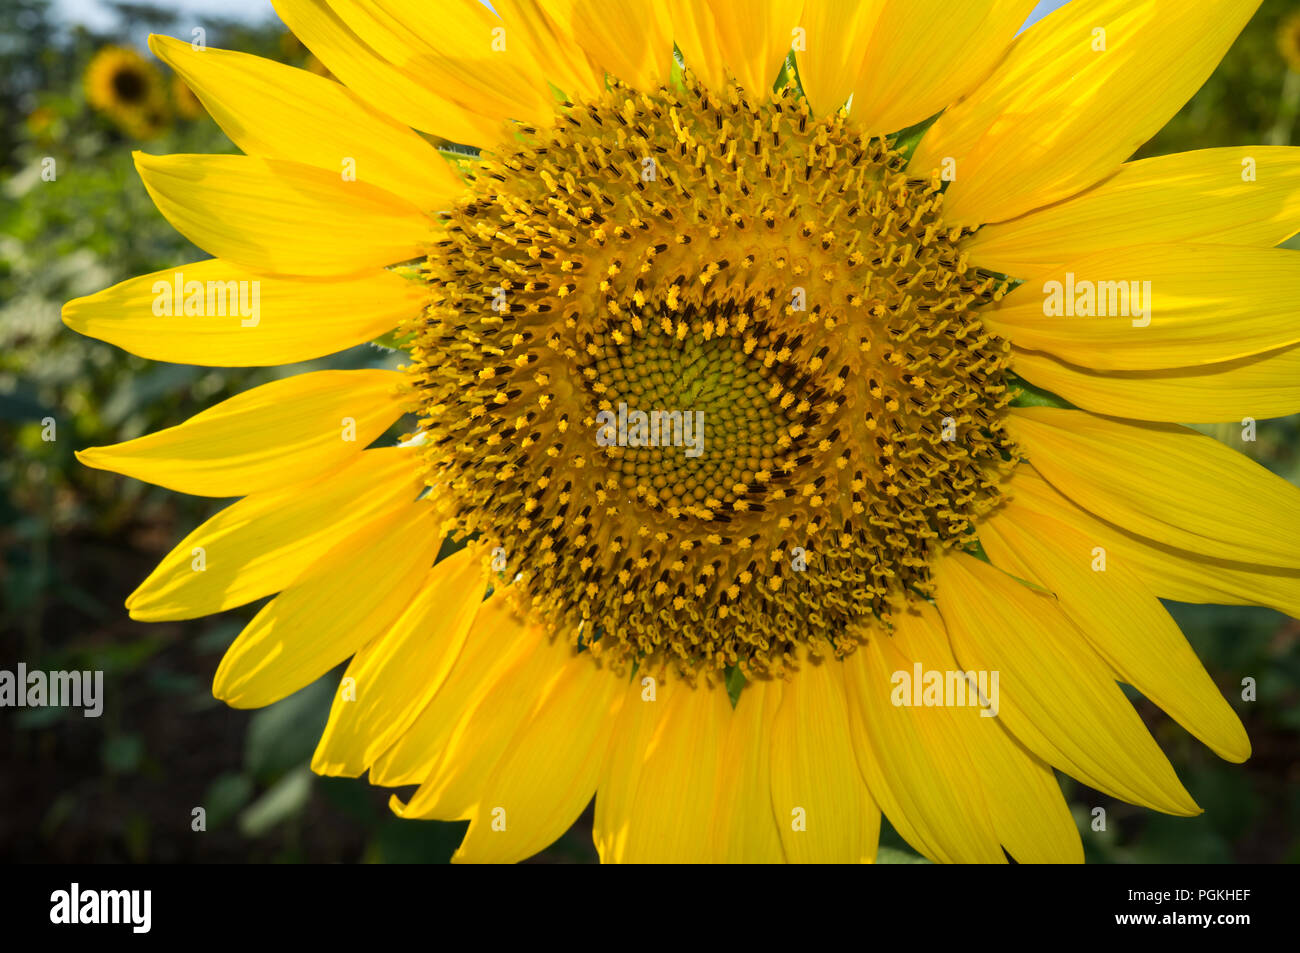 The sunflower (Helianthus annuus) is an annual plant in the family Asteraceae, with a large flower head (capitulum). Stock Photo